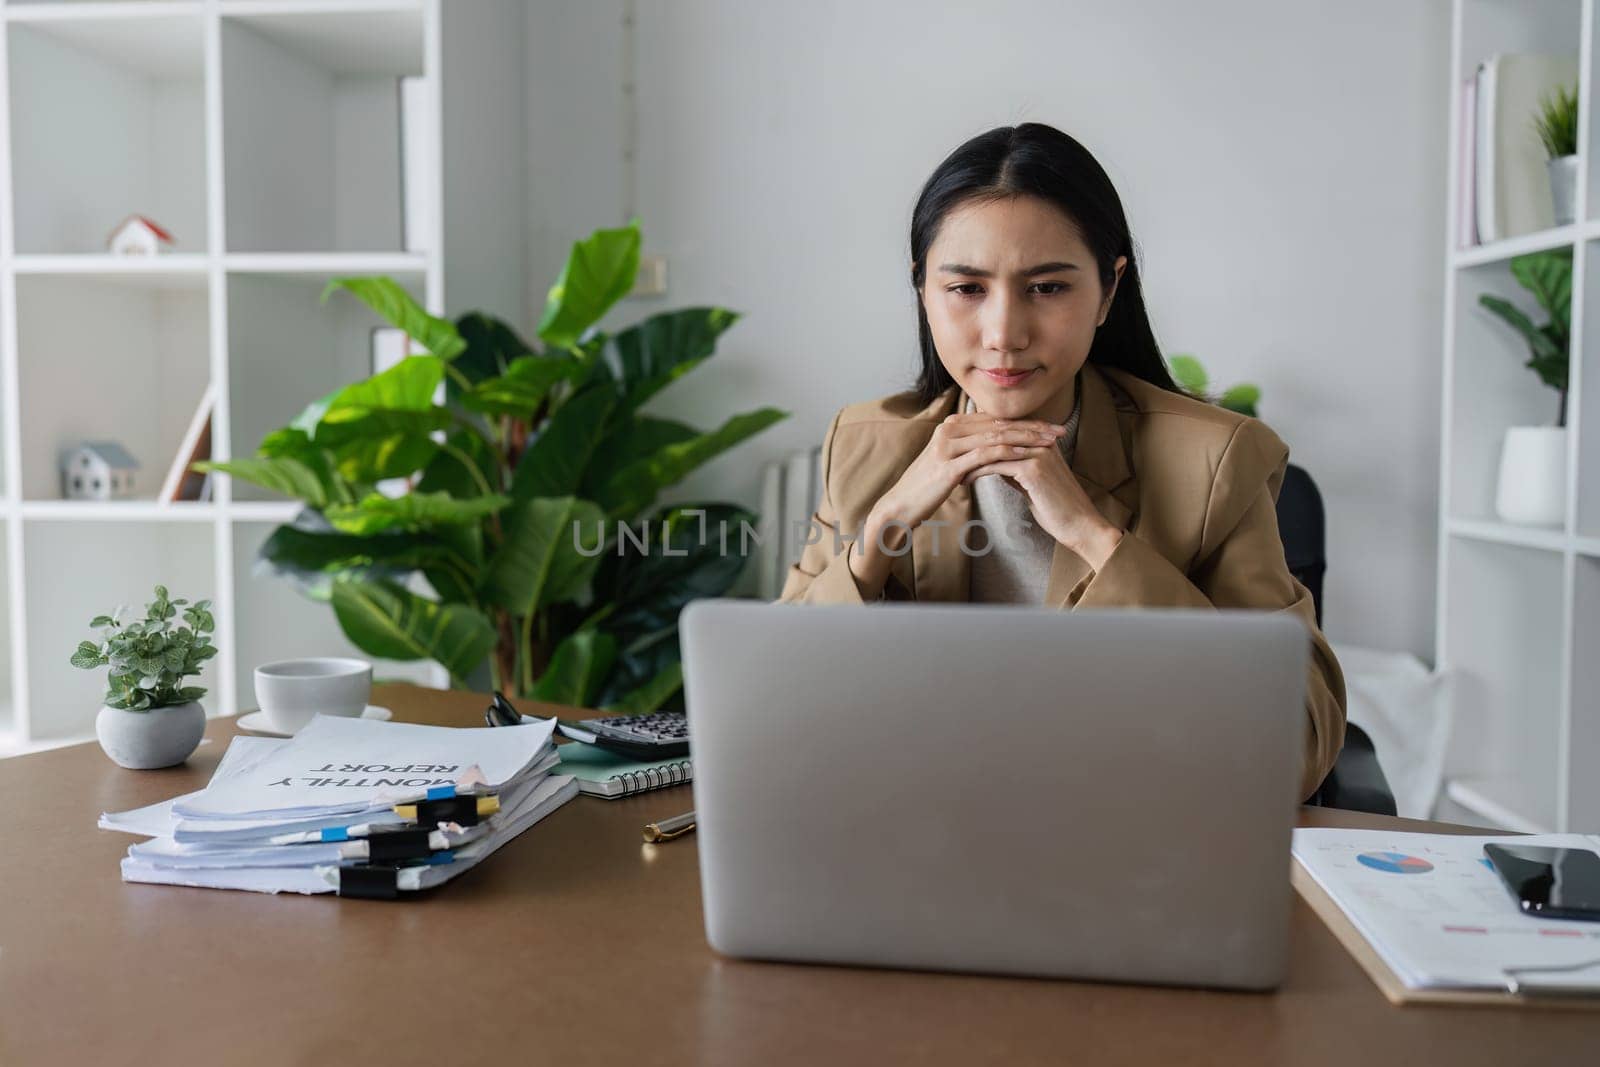 business woman entrepreneur in office using laptop at work, stress professional female company executive wearing suit working on computer at workplace by itchaznong